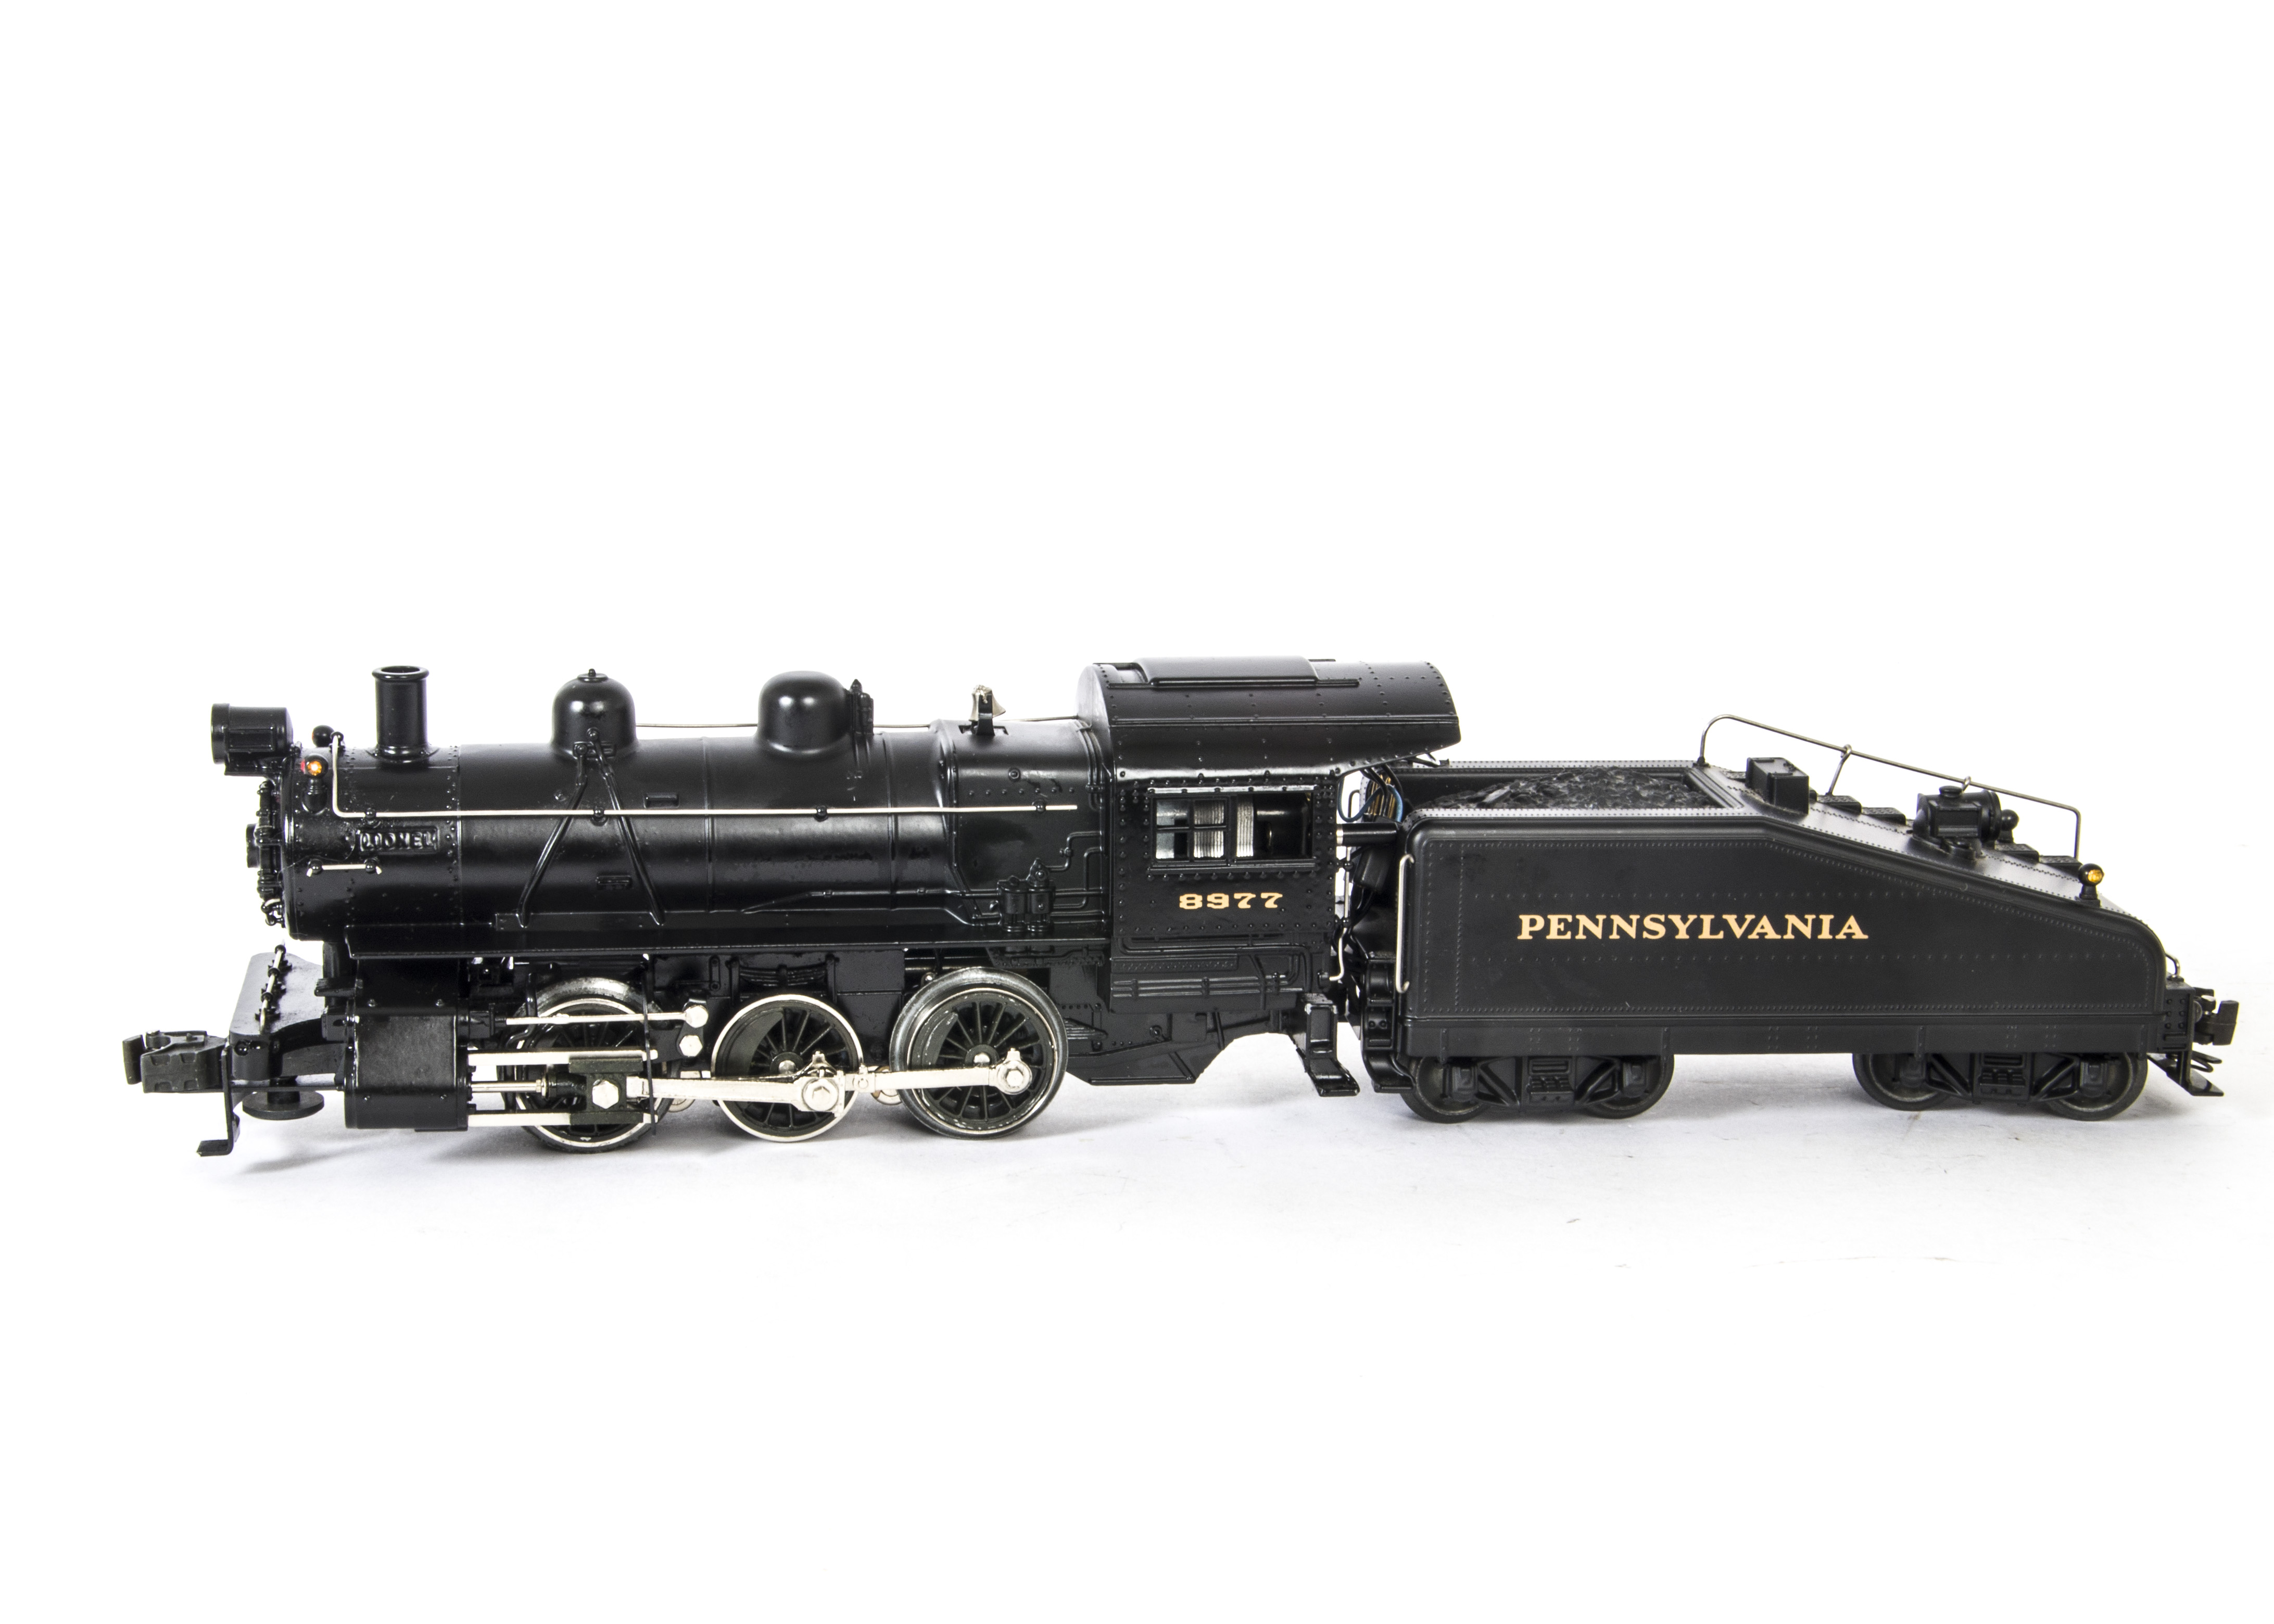 A Modern Lionel O Gauge 3-rail B6 0-6-0 Switcher Locomotive and Tender, in Pennsylvania black livery